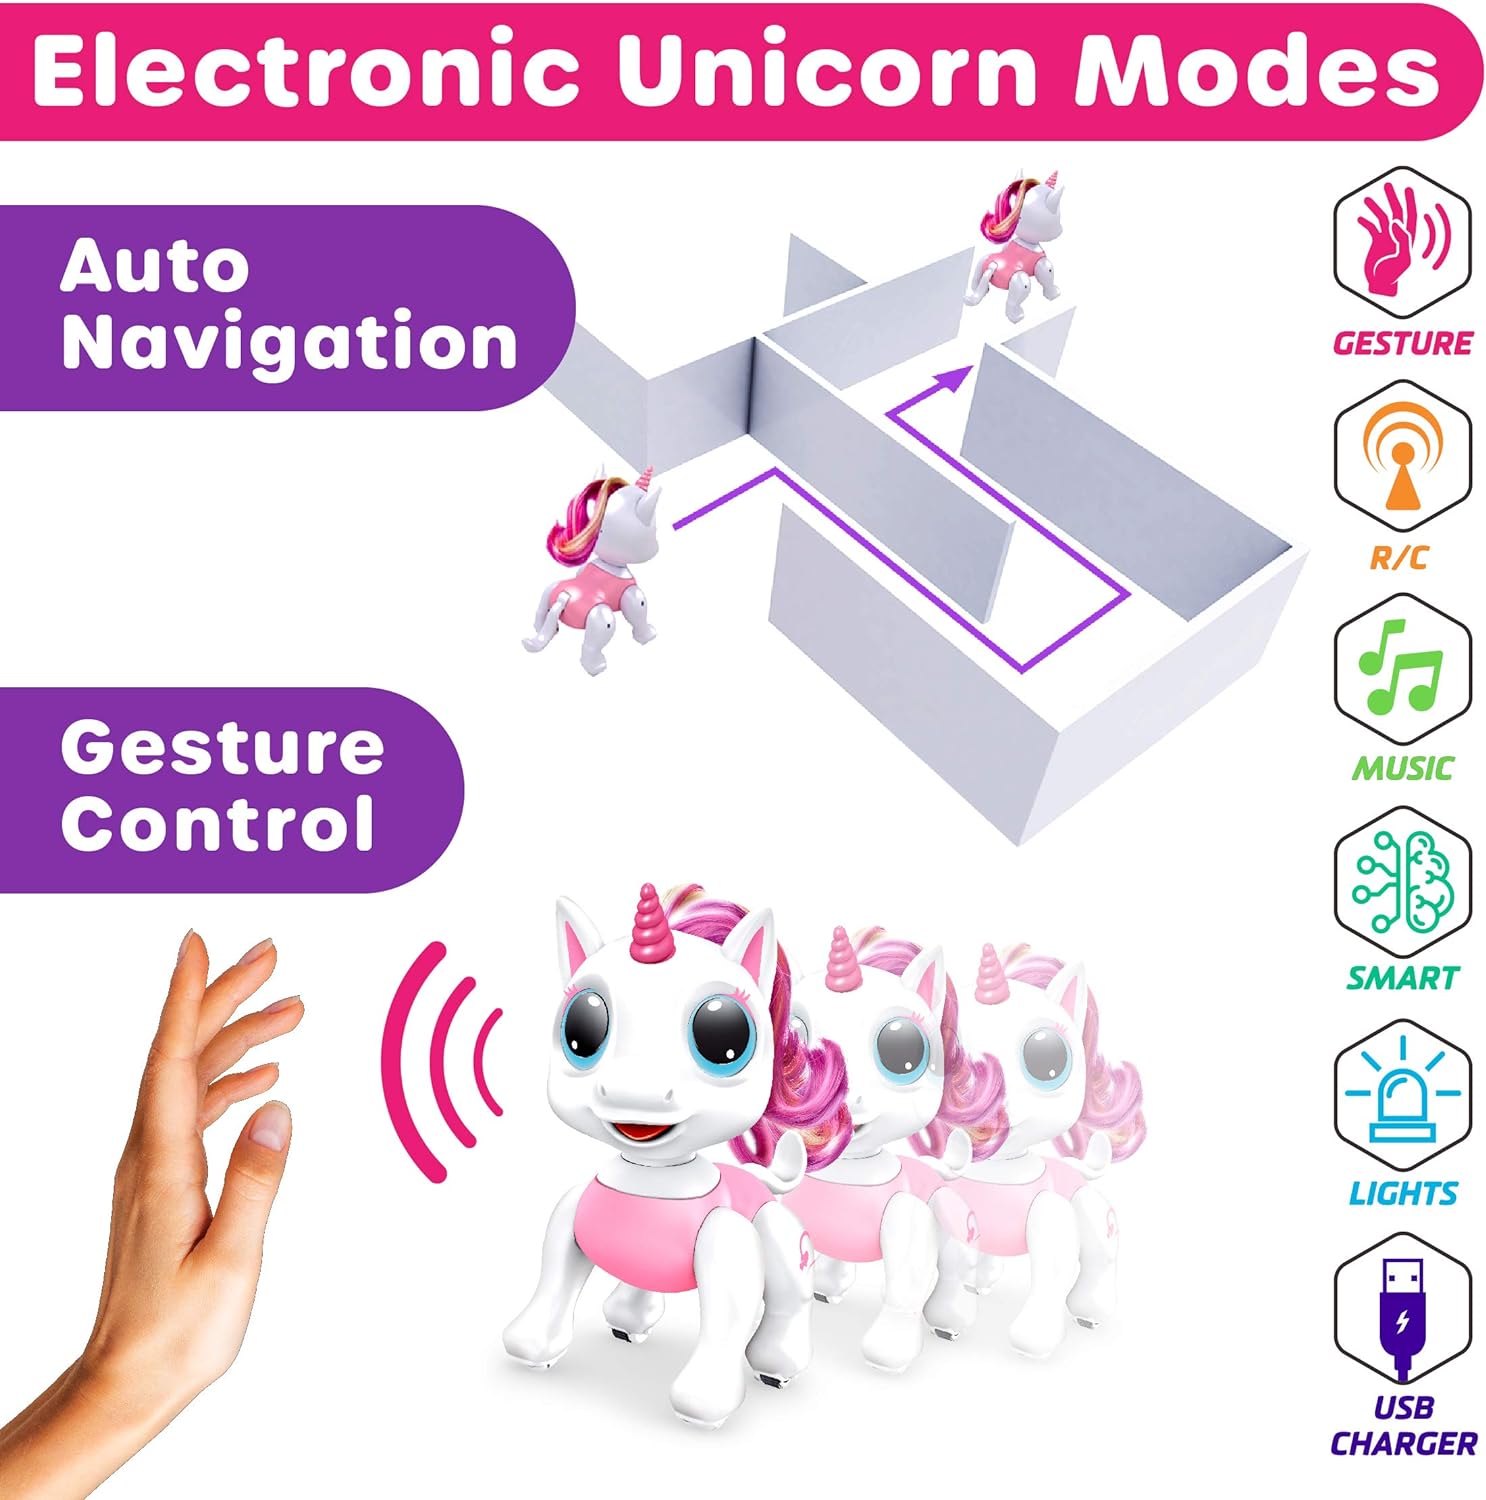 Power Your Fun Robo Pets Toy for Girls and Boys - Remote Control Toy with Interactive Hand Motion Gestures, STEM Program Treats, Walking and Dancing Robot Unicorn Kids (Pink)